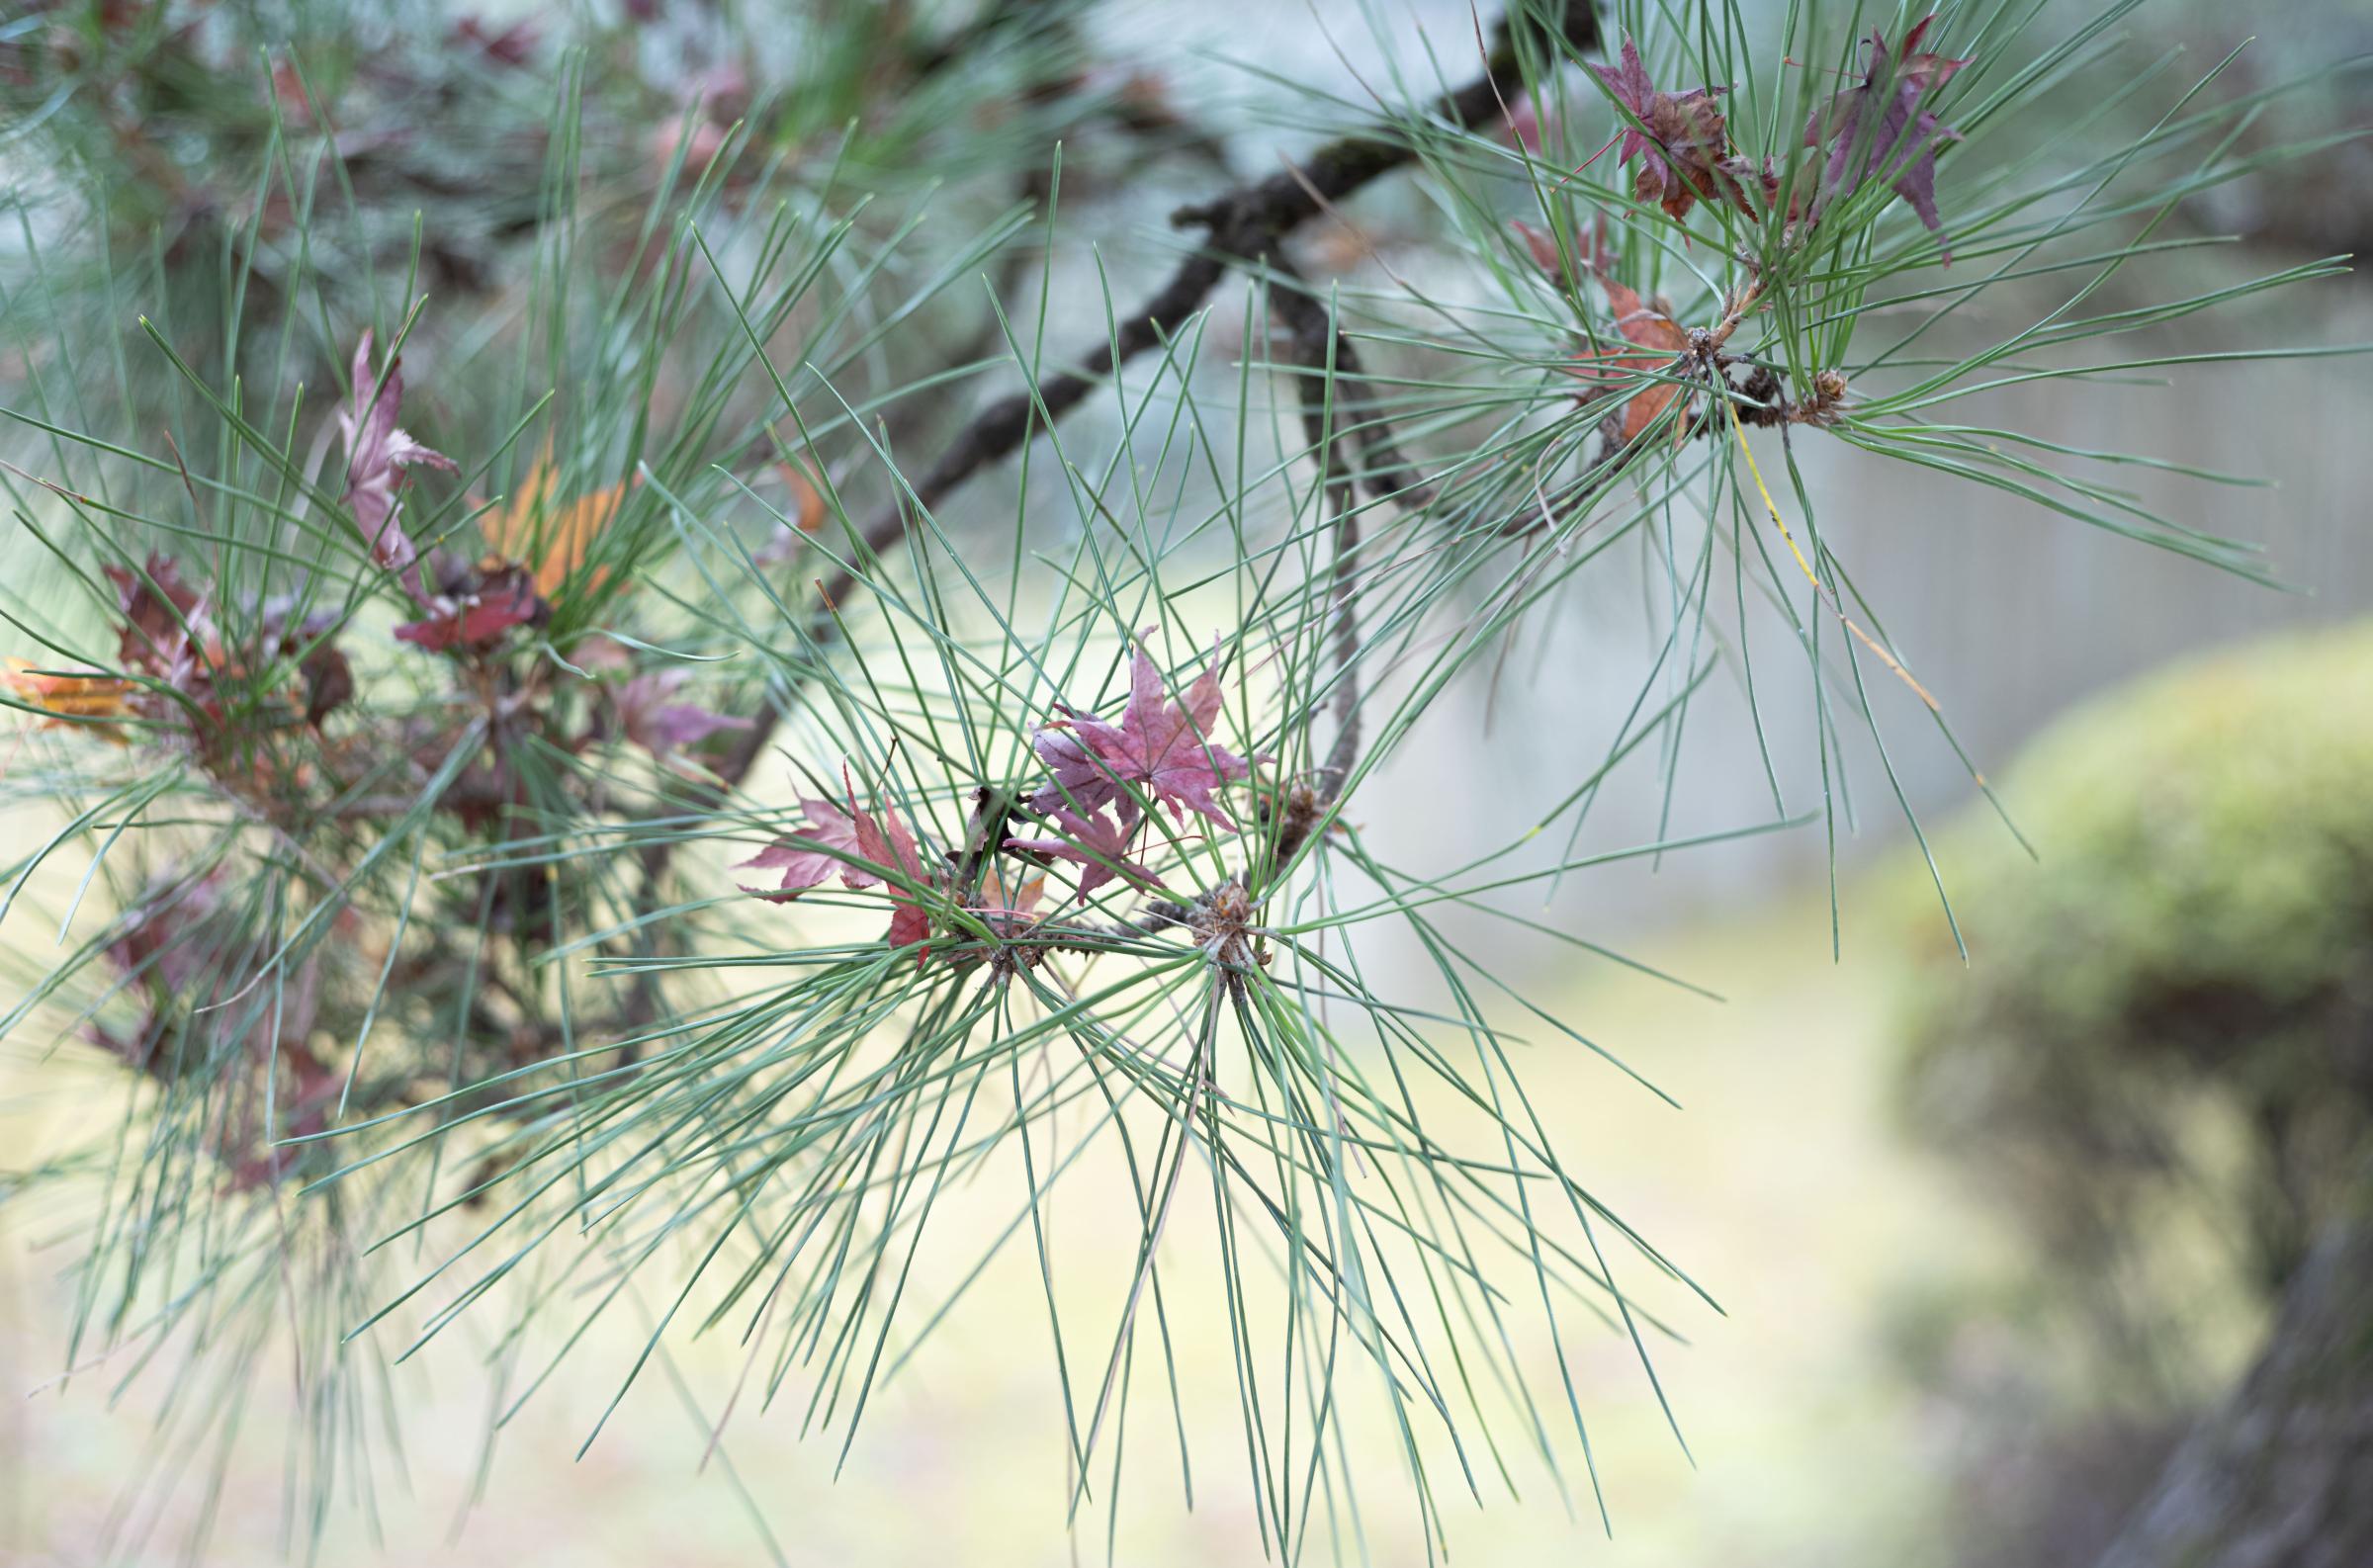 The Beauty of Ephemeral Moments, Kyoto 2022 - Spiky